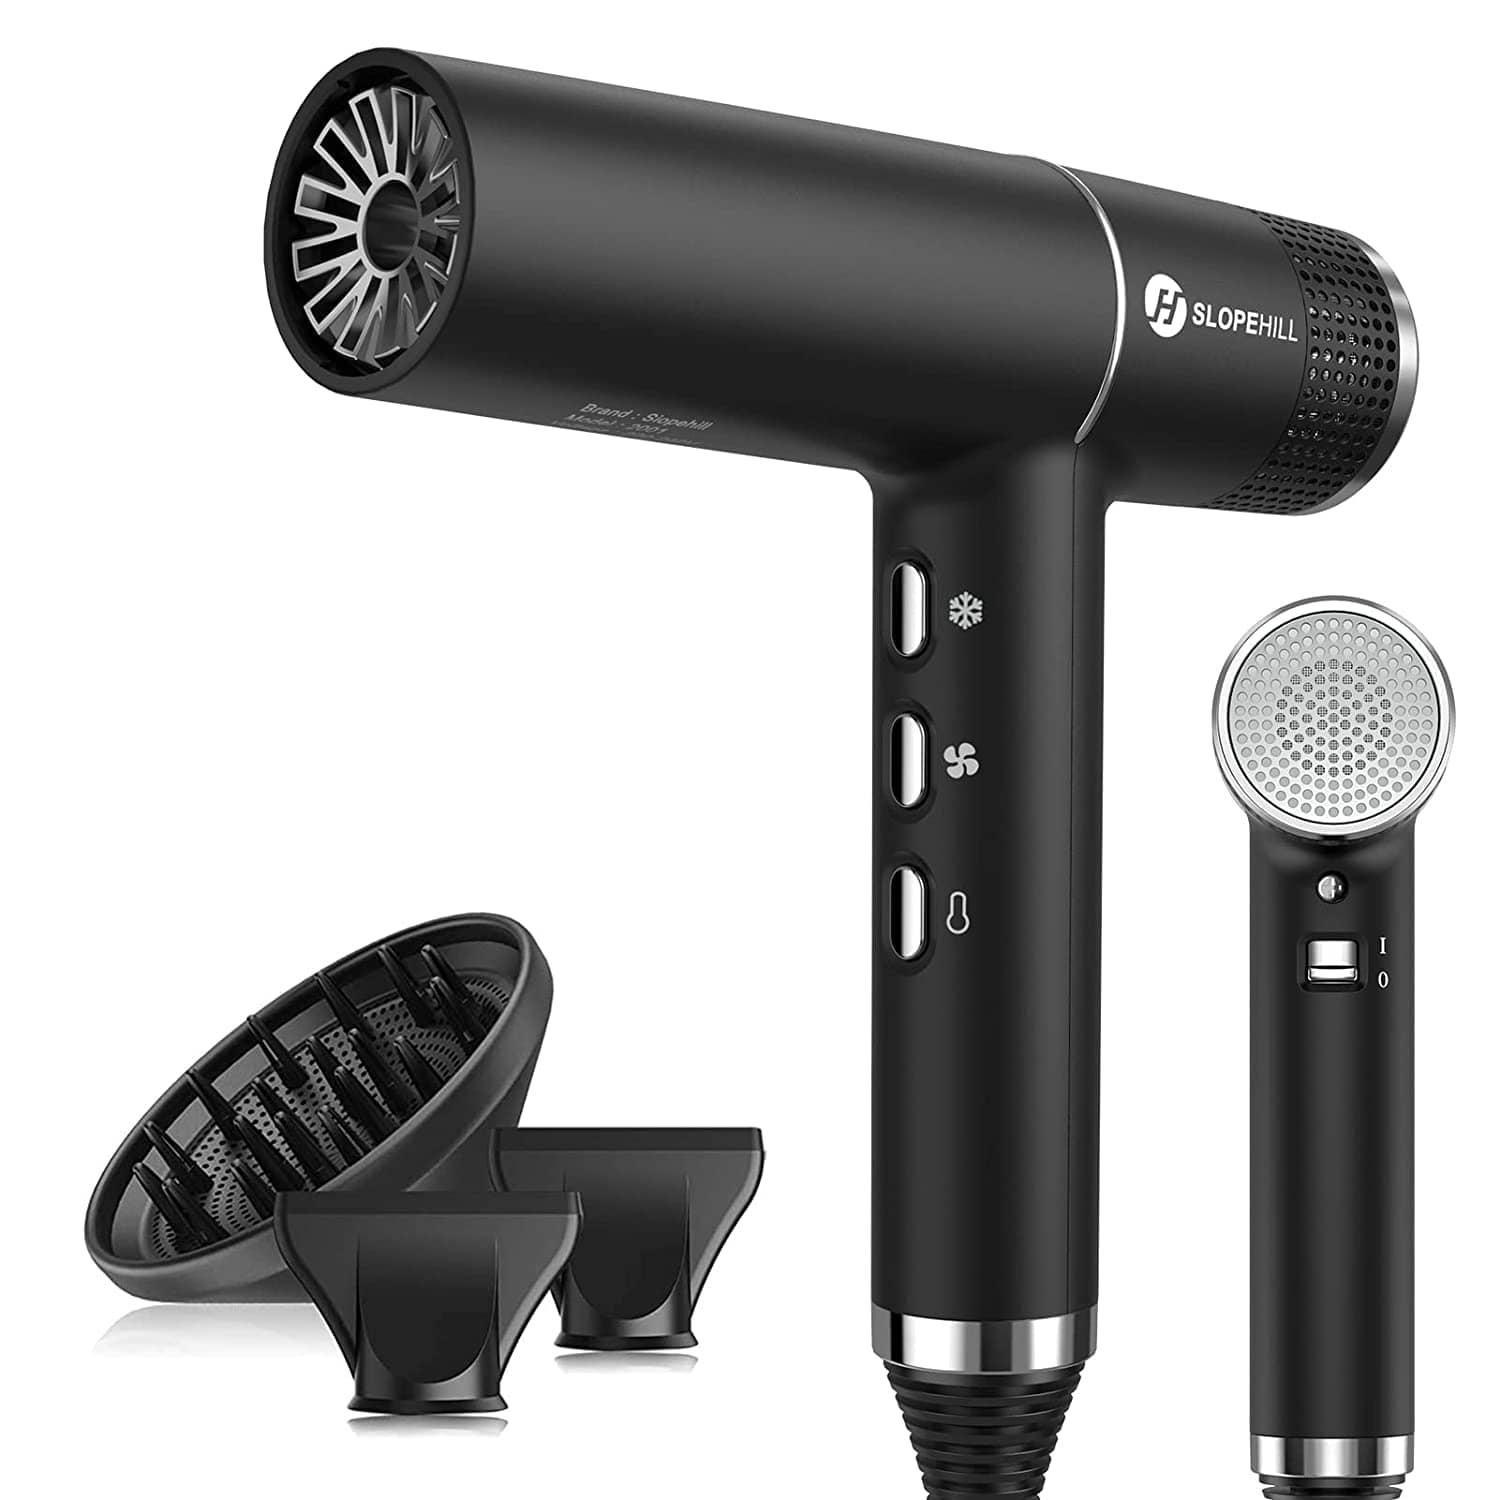 slopehill Hair Dryer with Unique Brushless Motor | IQ Perfetto | Innovative Microfilter | Oxy Active Technology | Led Display (Black)